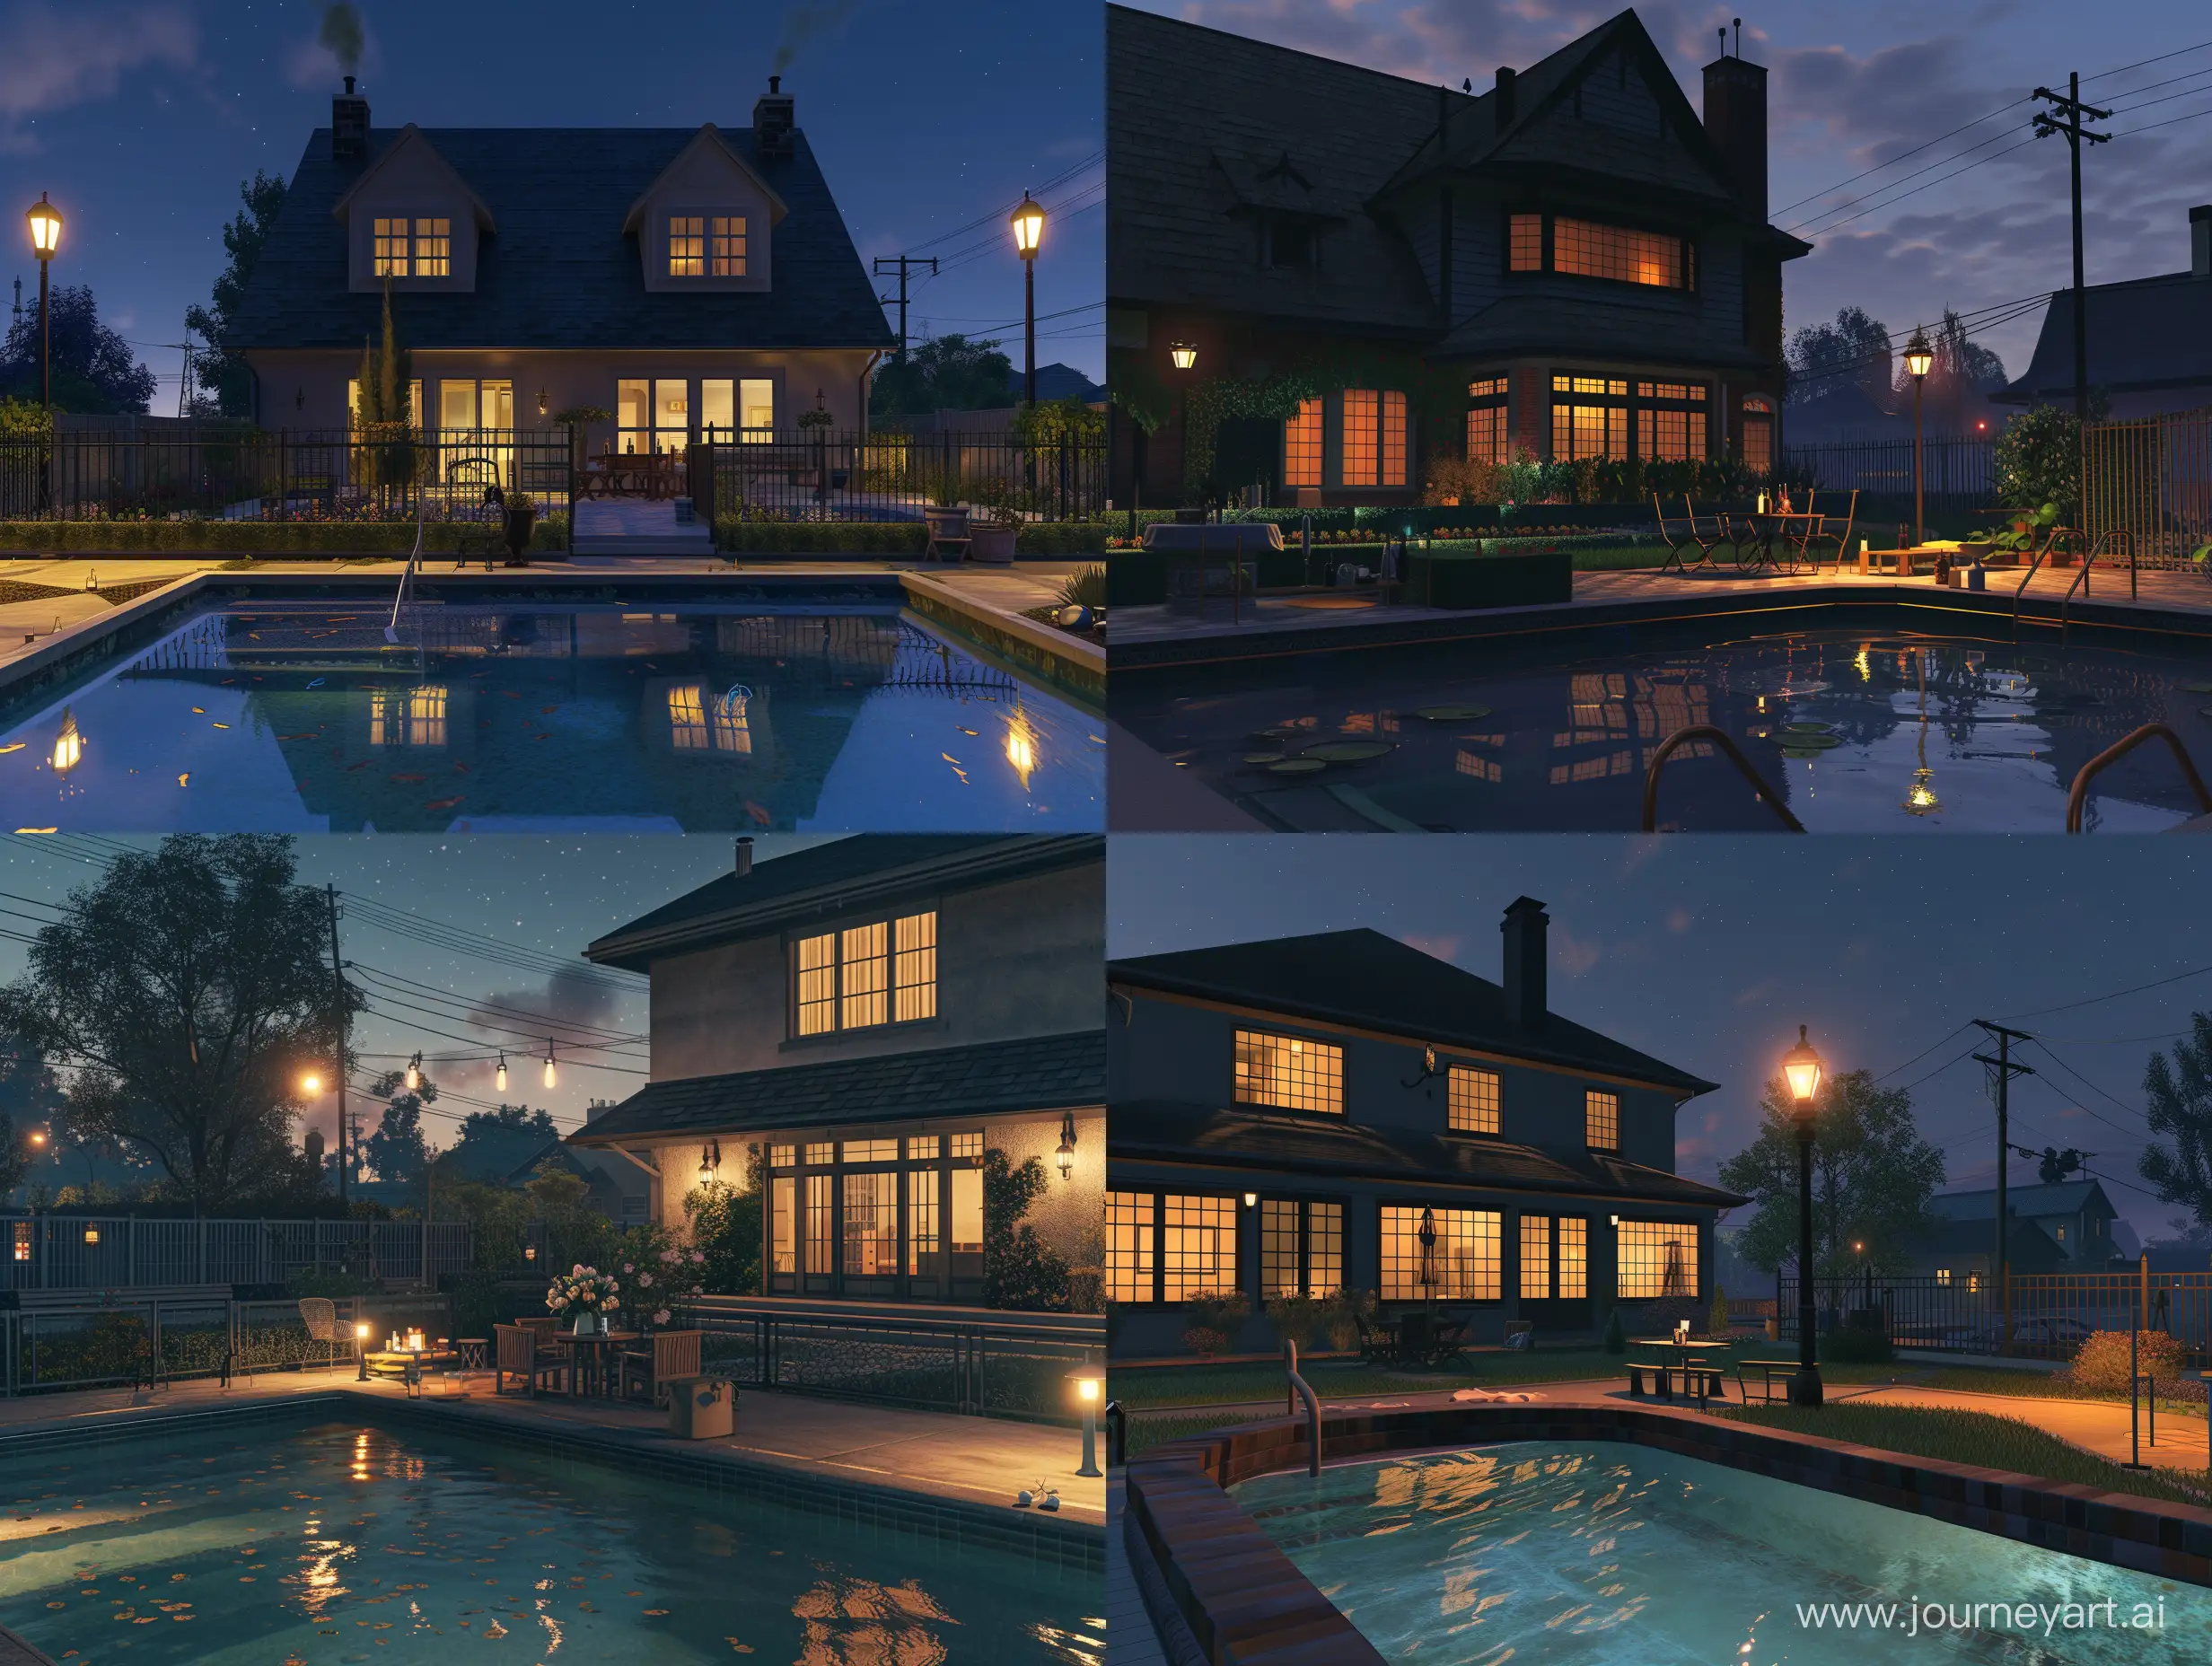 low horizon line. in full growth Wholly beautiful american style large house with a roof, and windows, at night. big beautiful night skies. a backyard with gardens. completely in the picture a small swimming pool, with edging and small steps. modern garden. street lamps. fresh reflecting in the clear transparent water. near of the pool a little table with drinks and candles. there are two chairs near the table. a fence with a gate. A street in the background. 8k, hyperealism, unreal engine